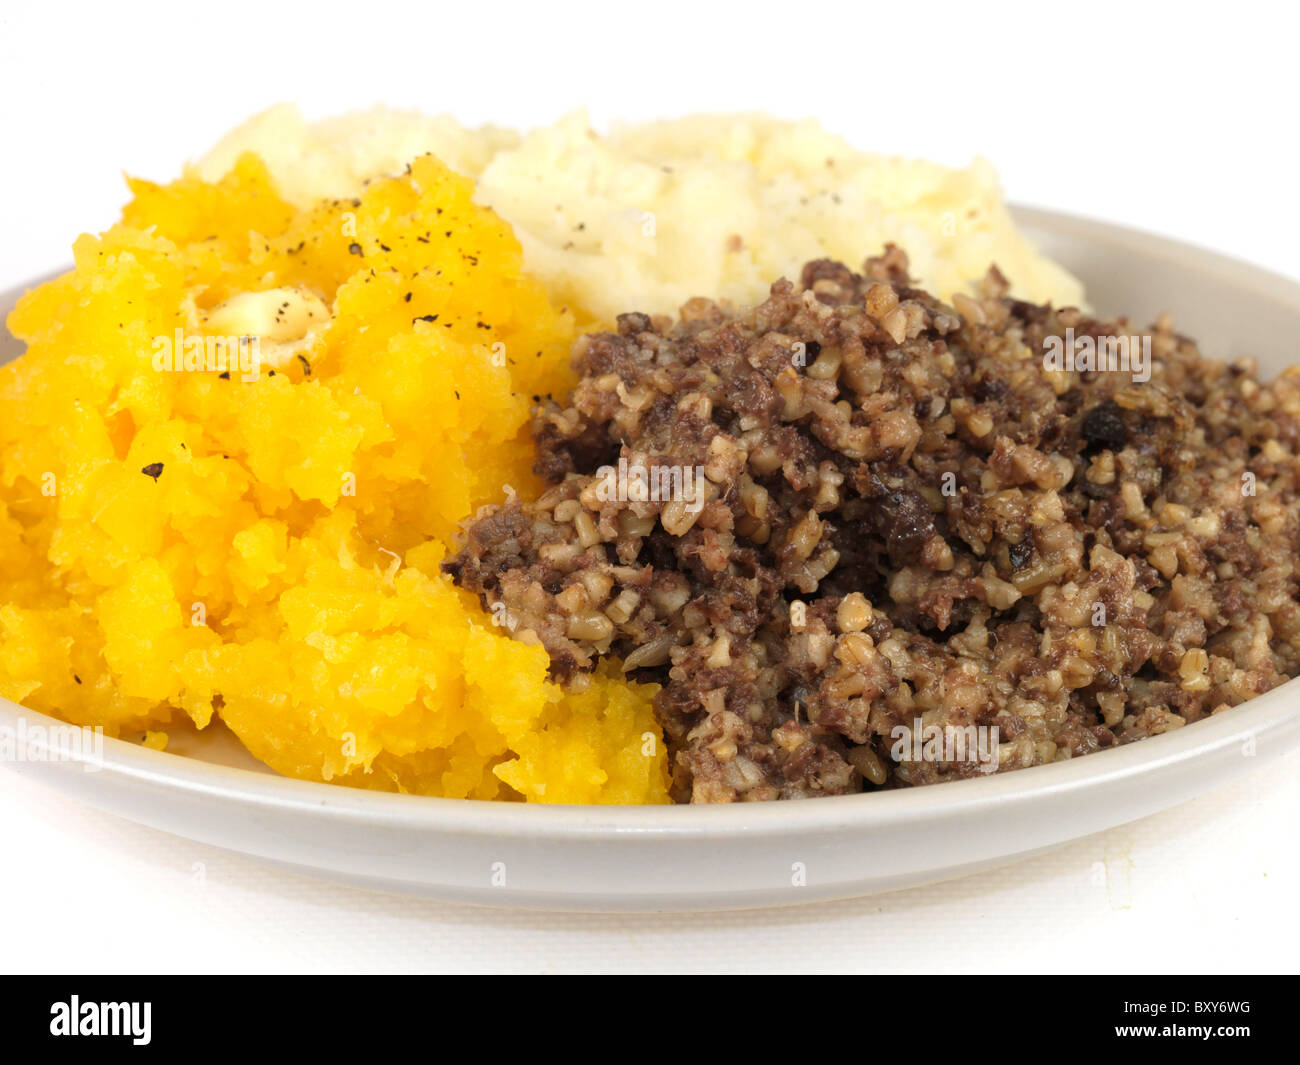 Authentic Style Scottish Burns Night Haggis With Swede And Mashed Potatoes Against A White Background With No People And A Clipping Path Stock Photo